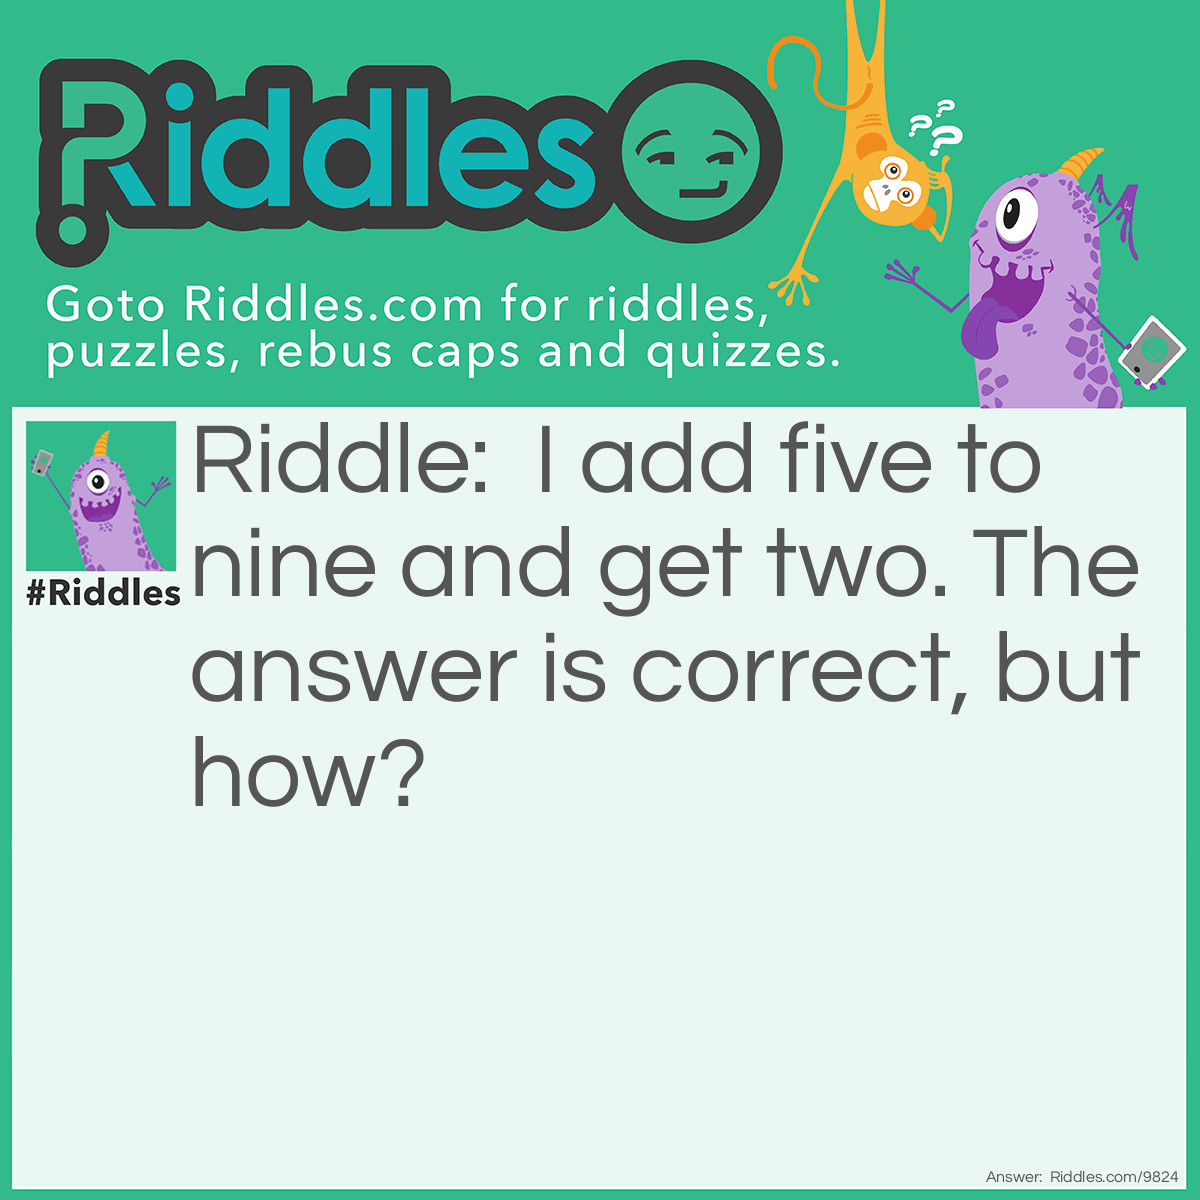 Riddle: I add five to nine and get two. The answer is correct, but how? Answer: When it is 9 AM, add 5 hours to it and you will get 2 PM.